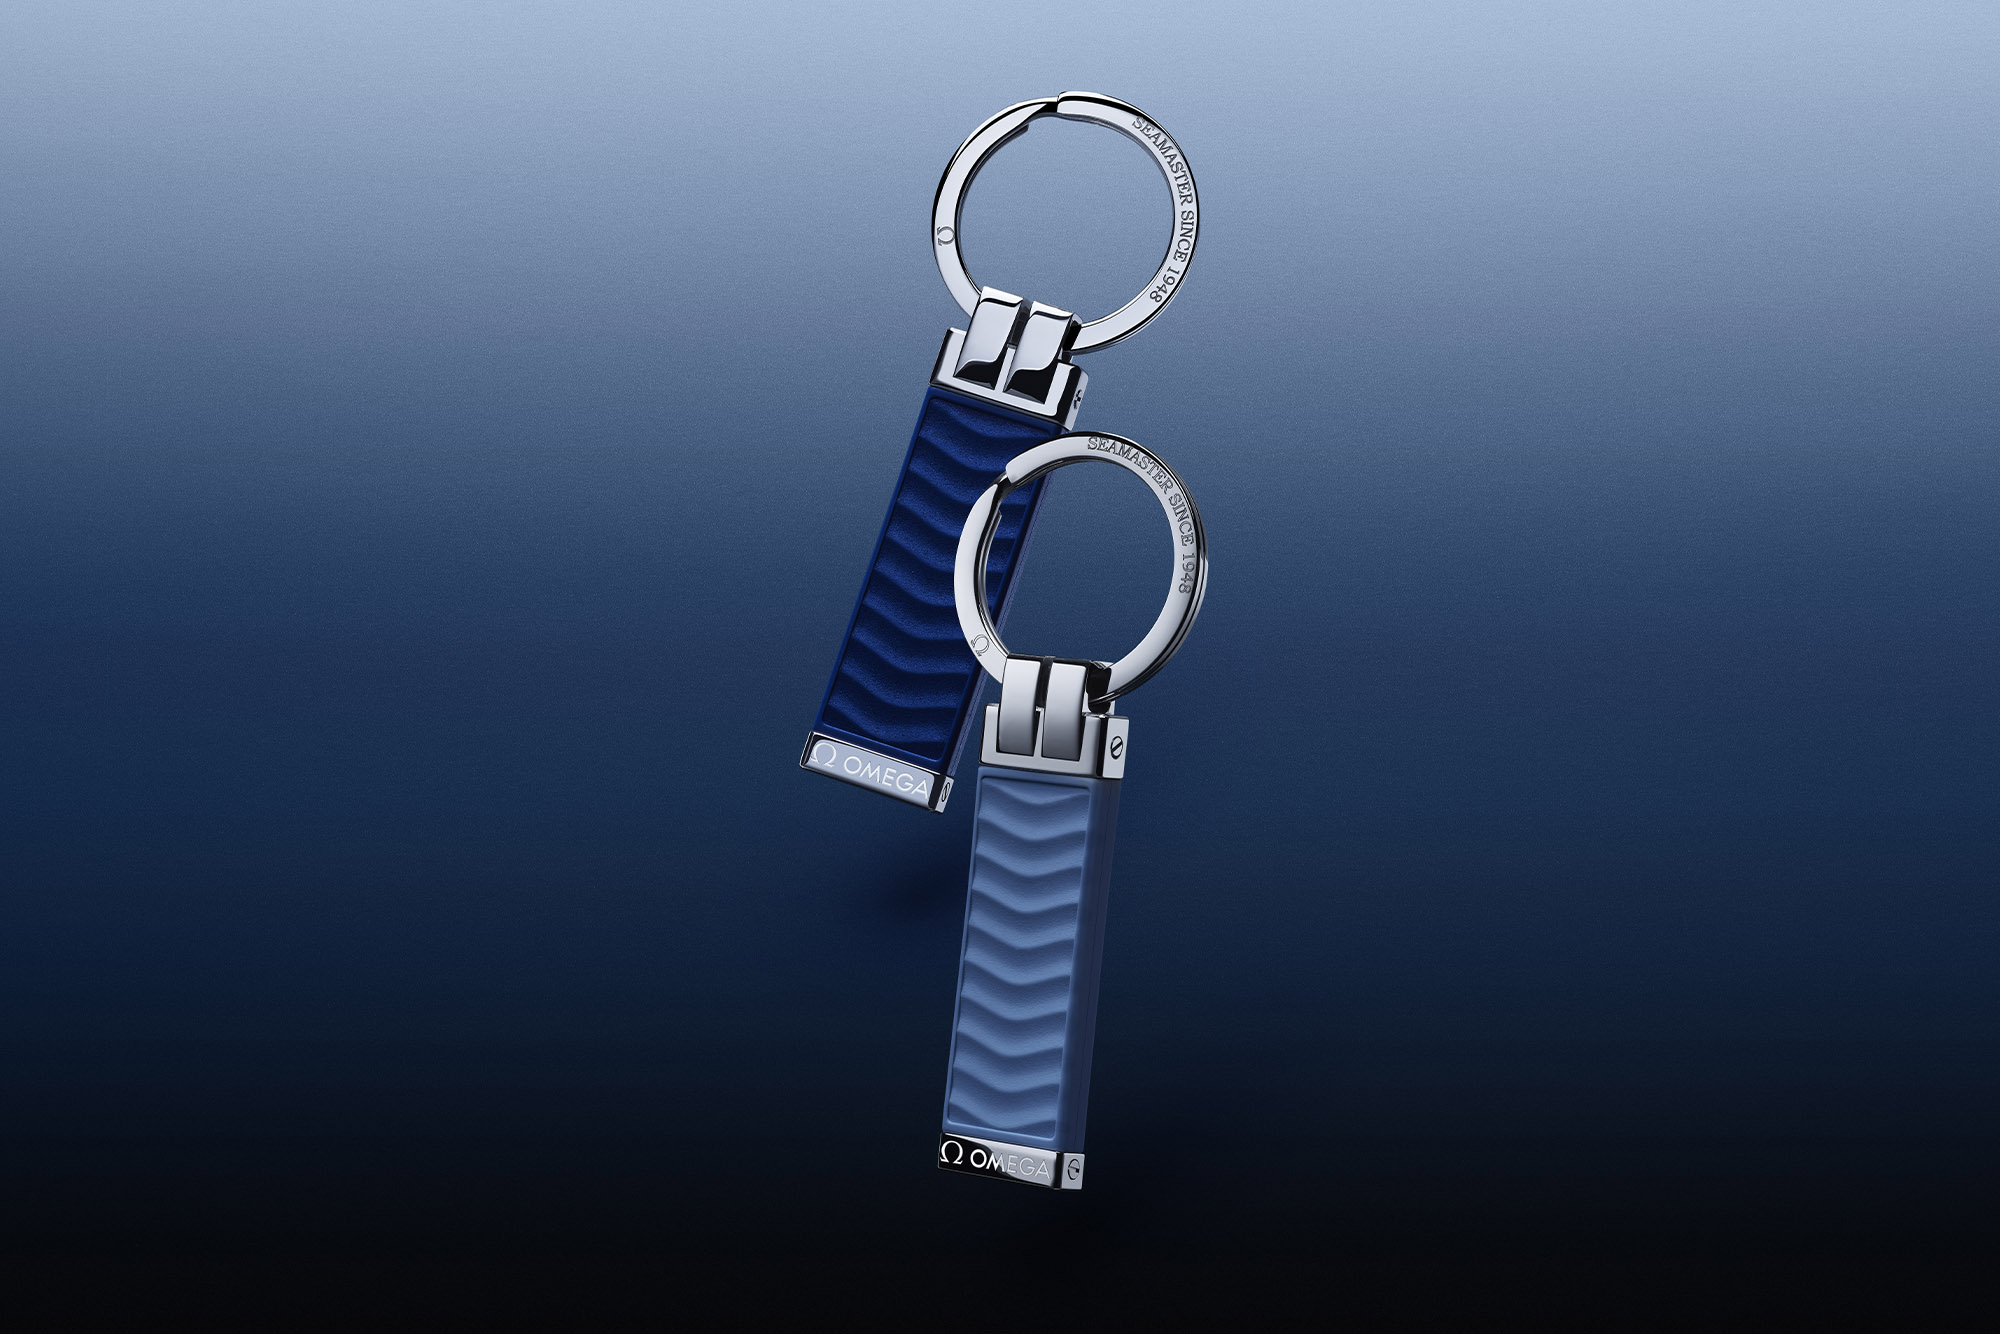 OMEGA Summer Blue Collection key ring in underwater setting